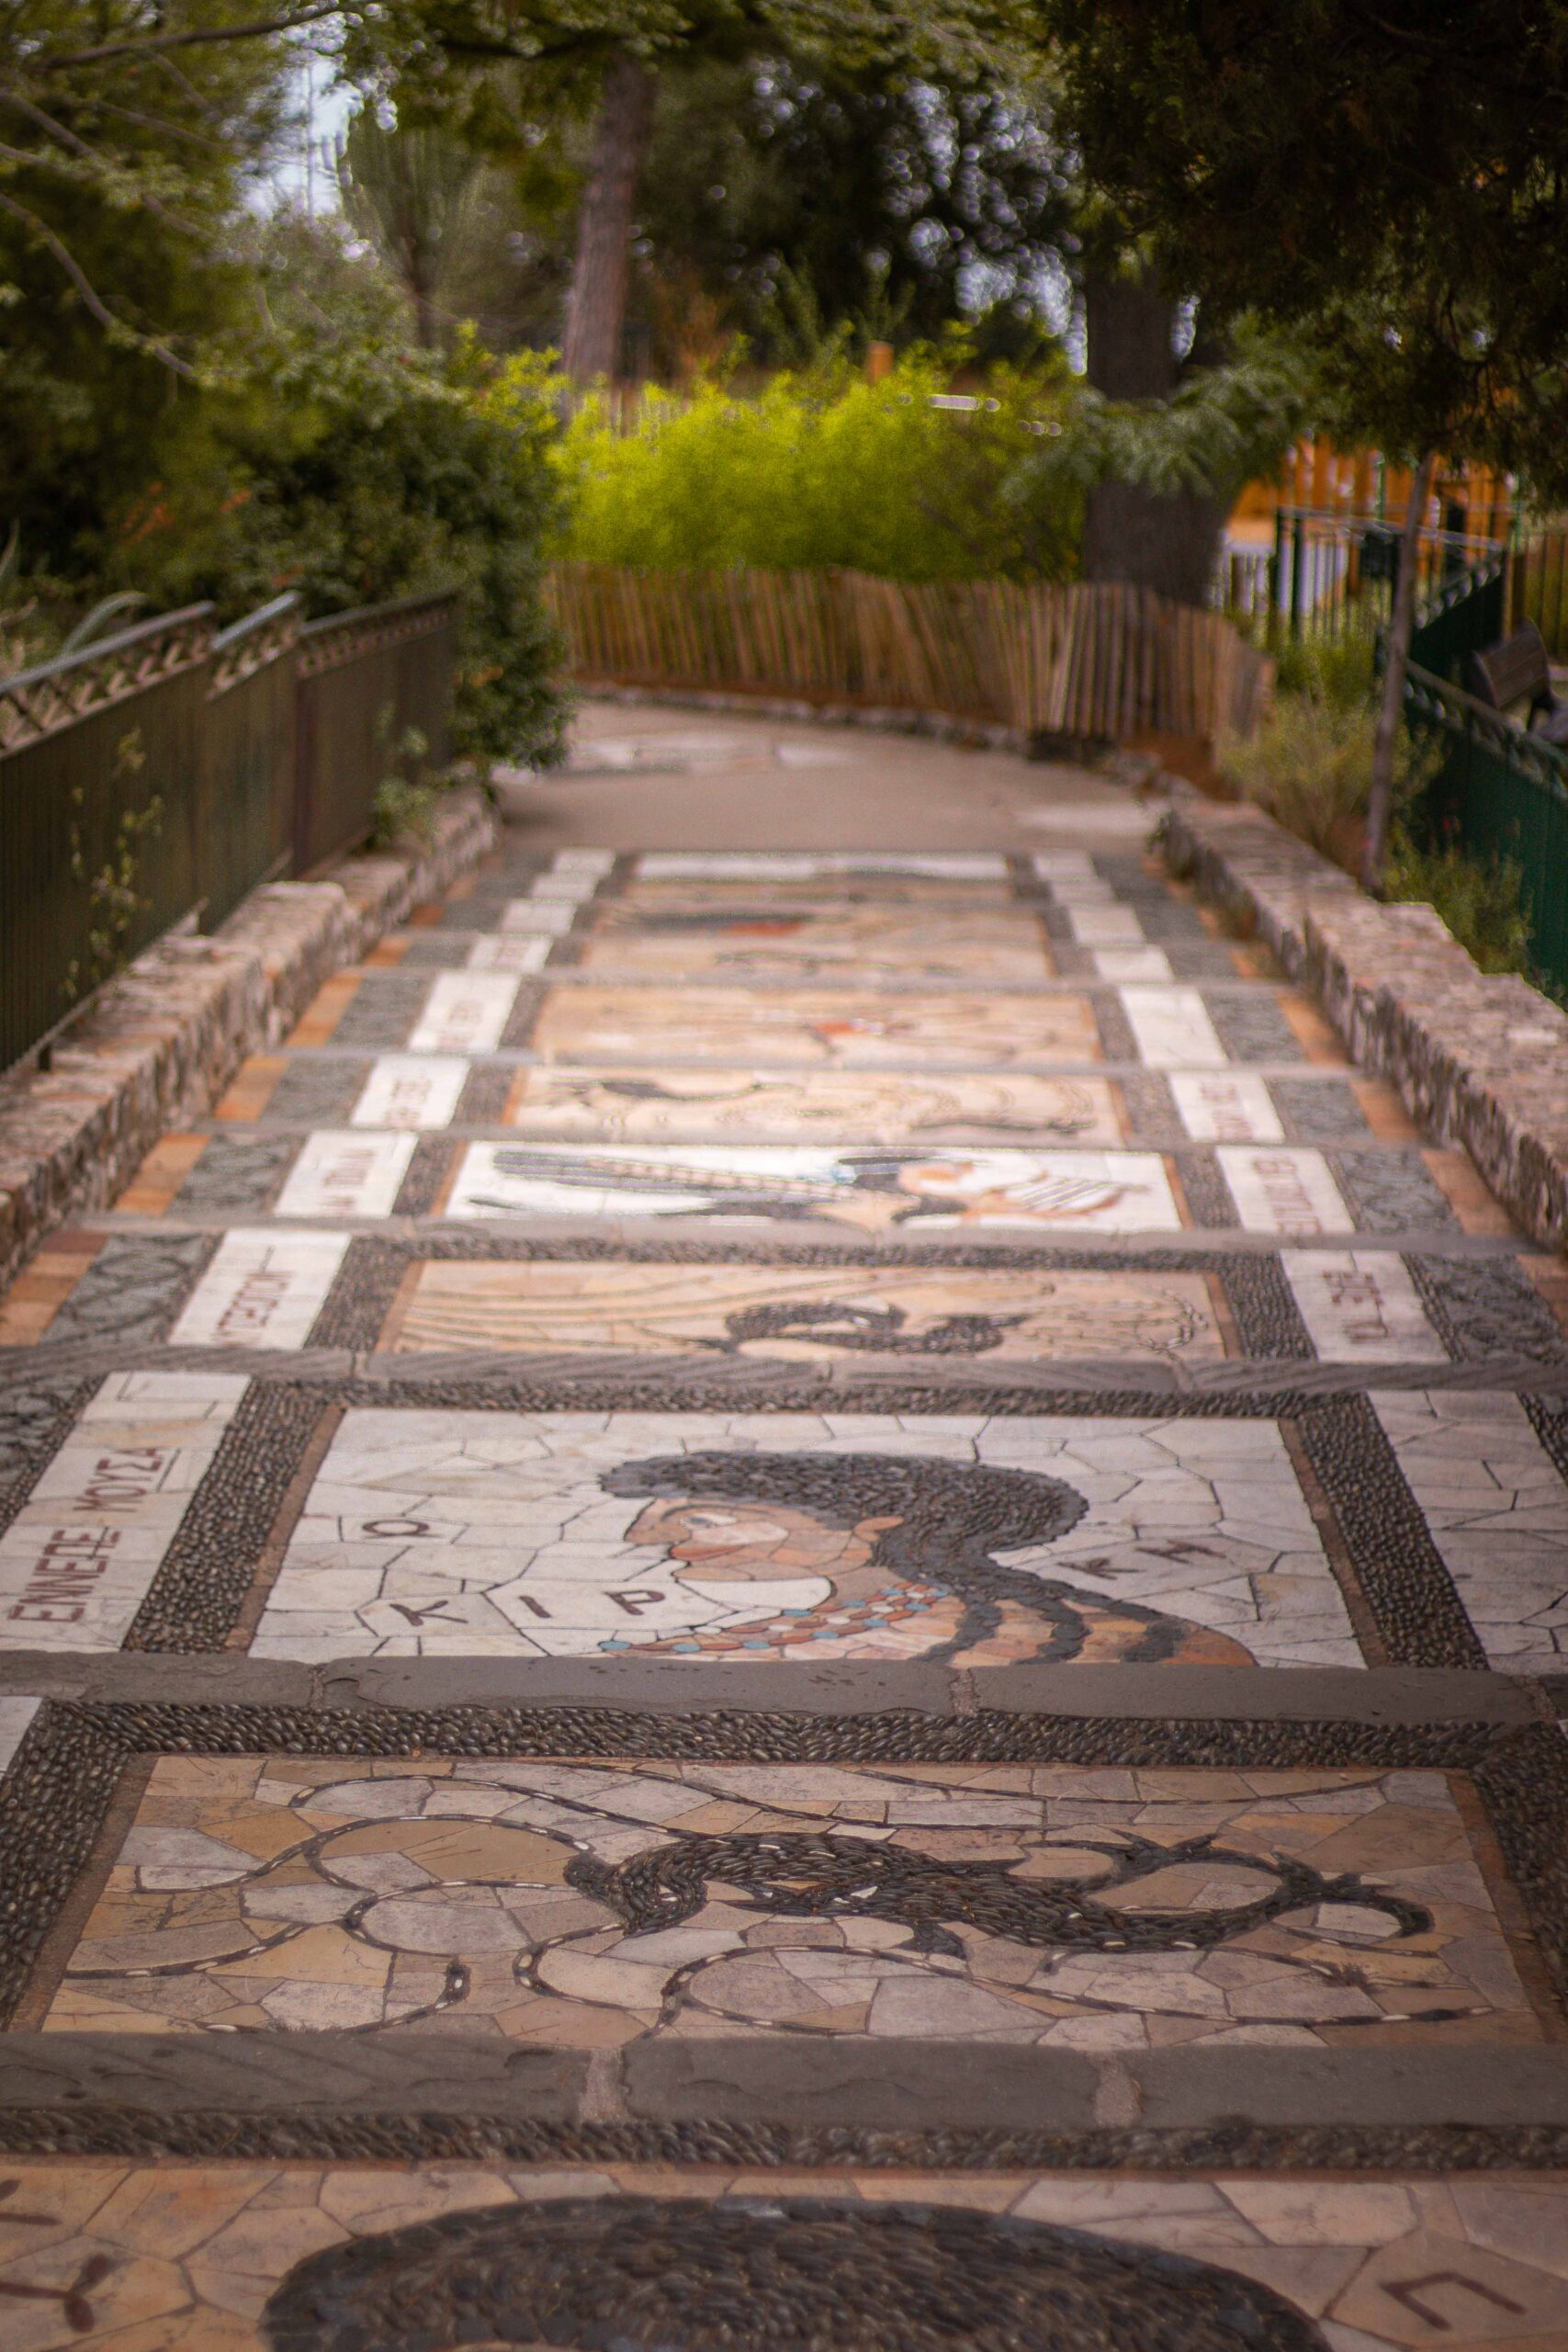 Ancient Roman staircase and mosaics in the Colline du Château (Castle Hill) park in Nice, France